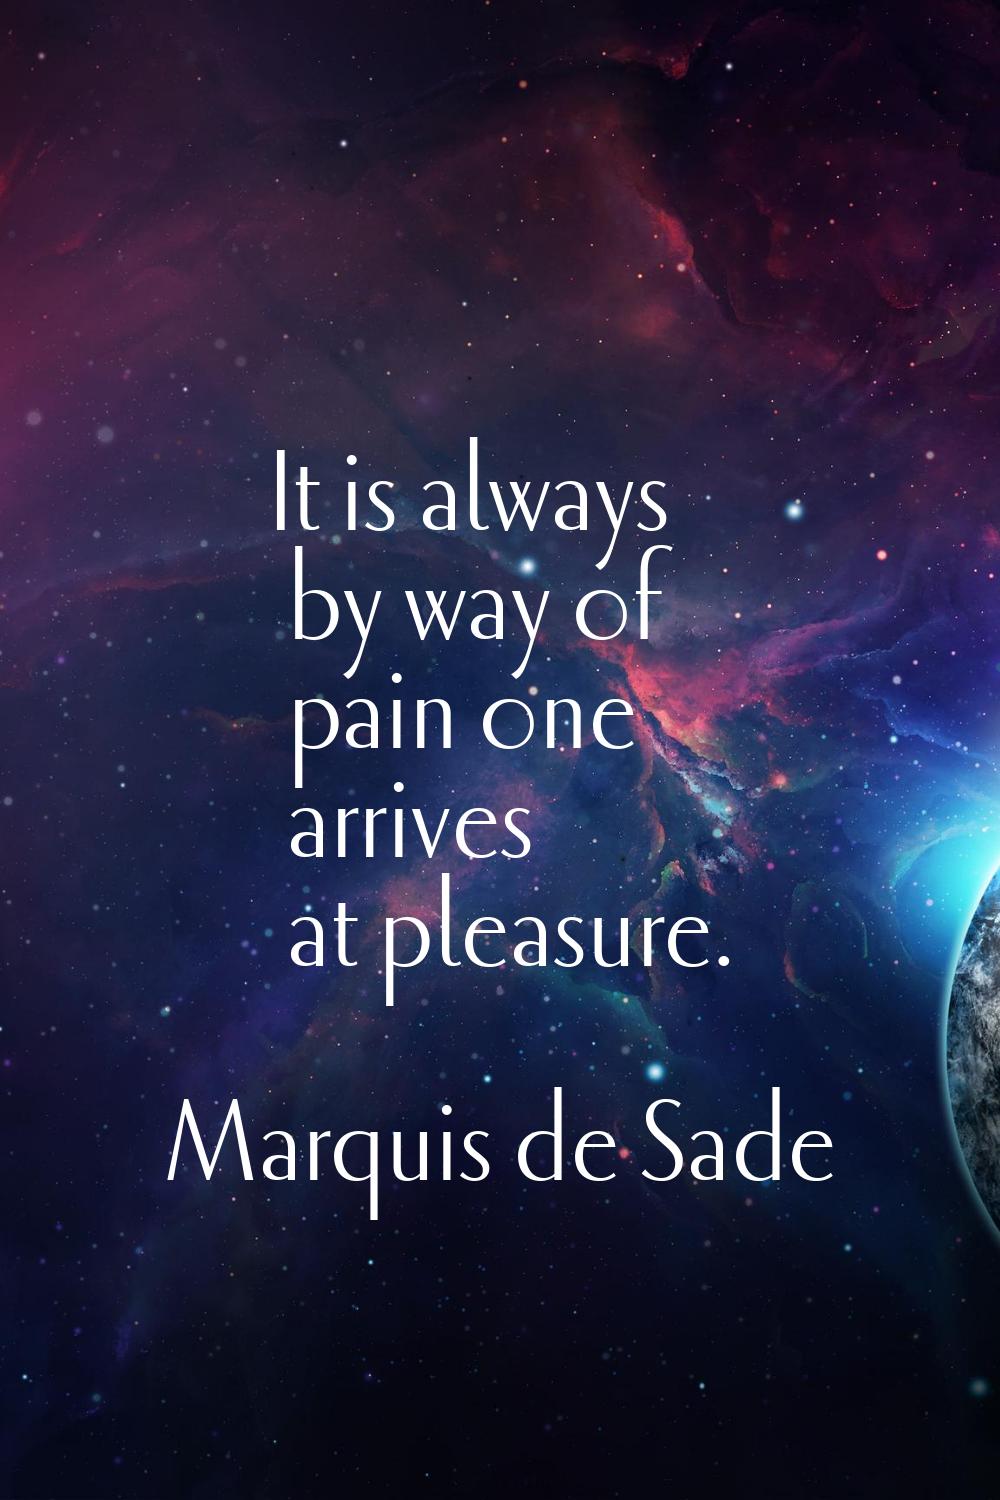 It is always by way of pain one arrives at pleasure.